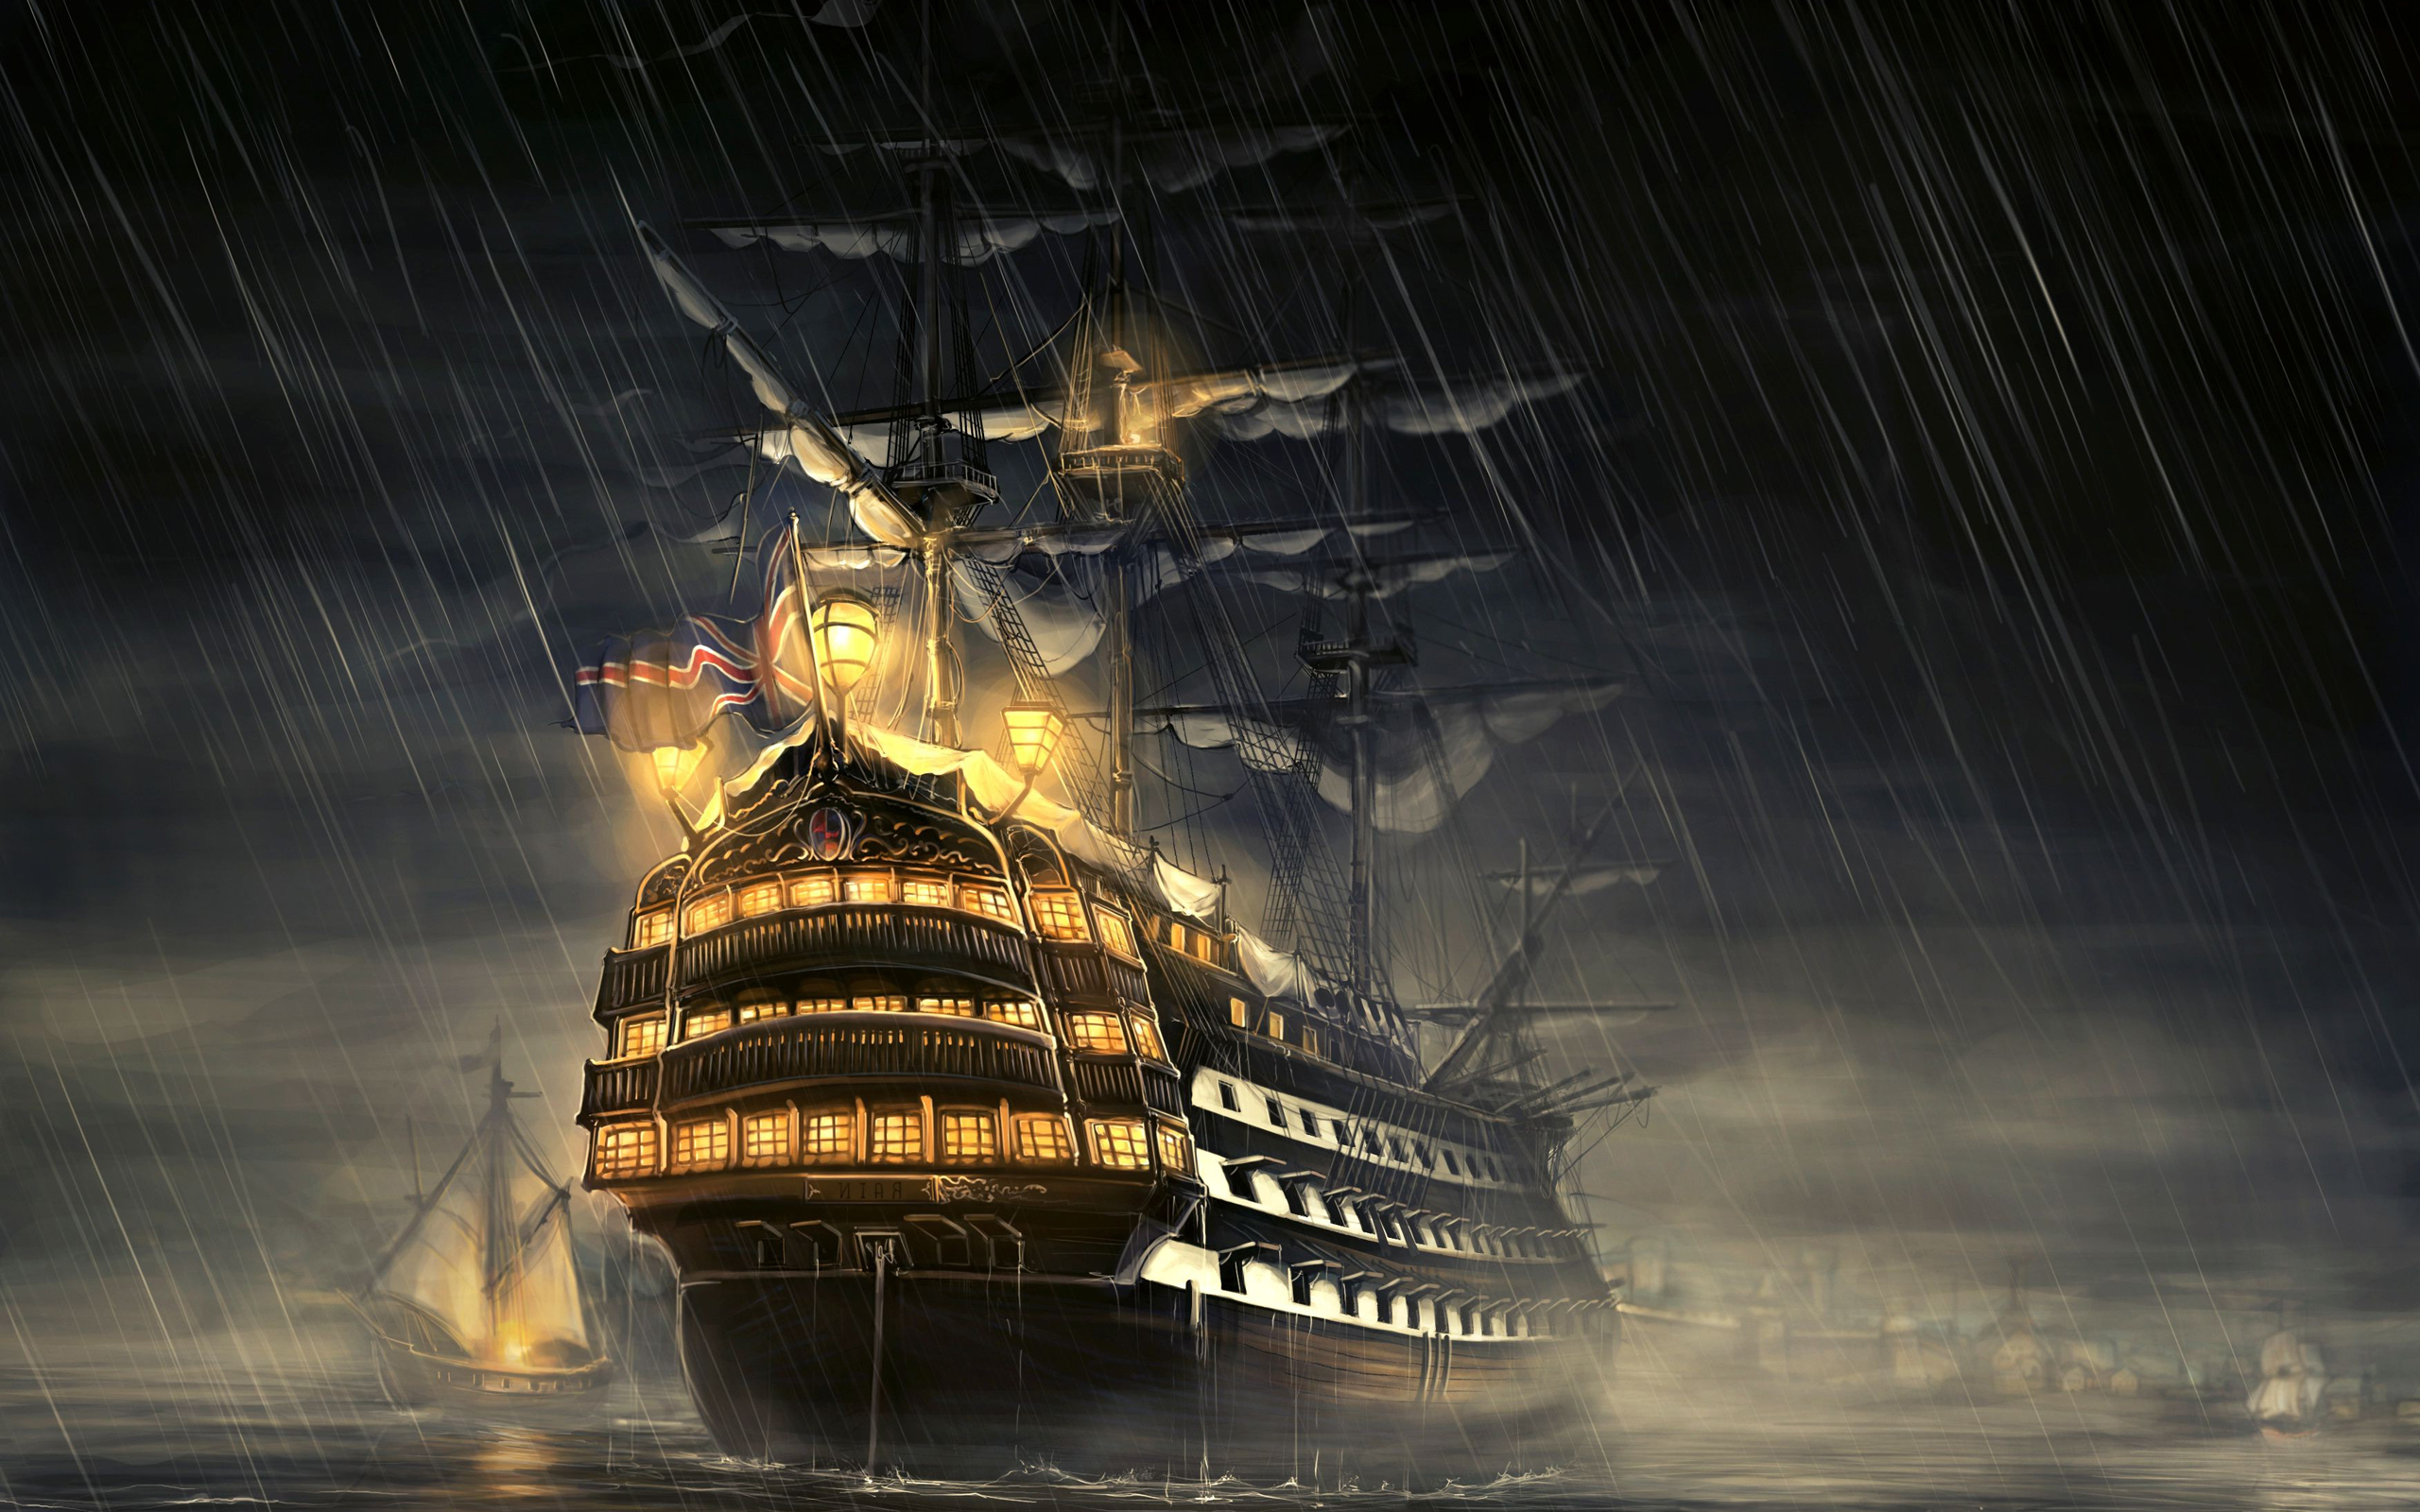 Ship Wallpaper Images in HD Available Here For Download 2560x1600